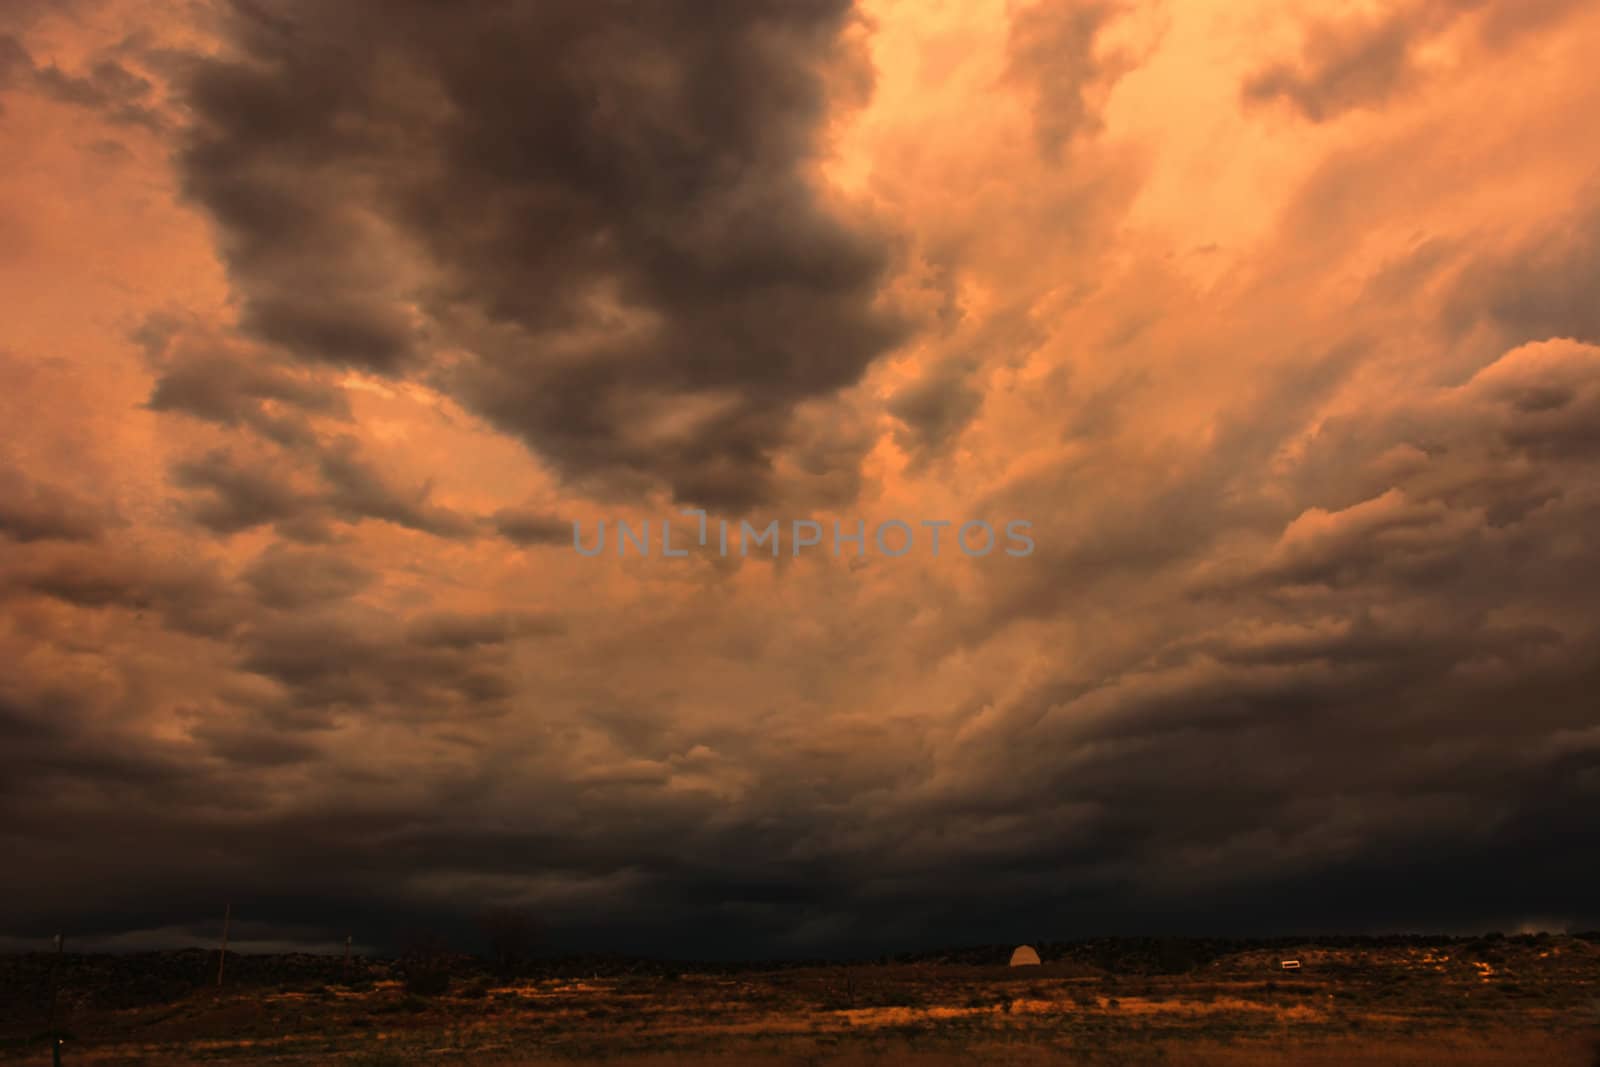 Ominous thunderheads rolling over landscape at sunset